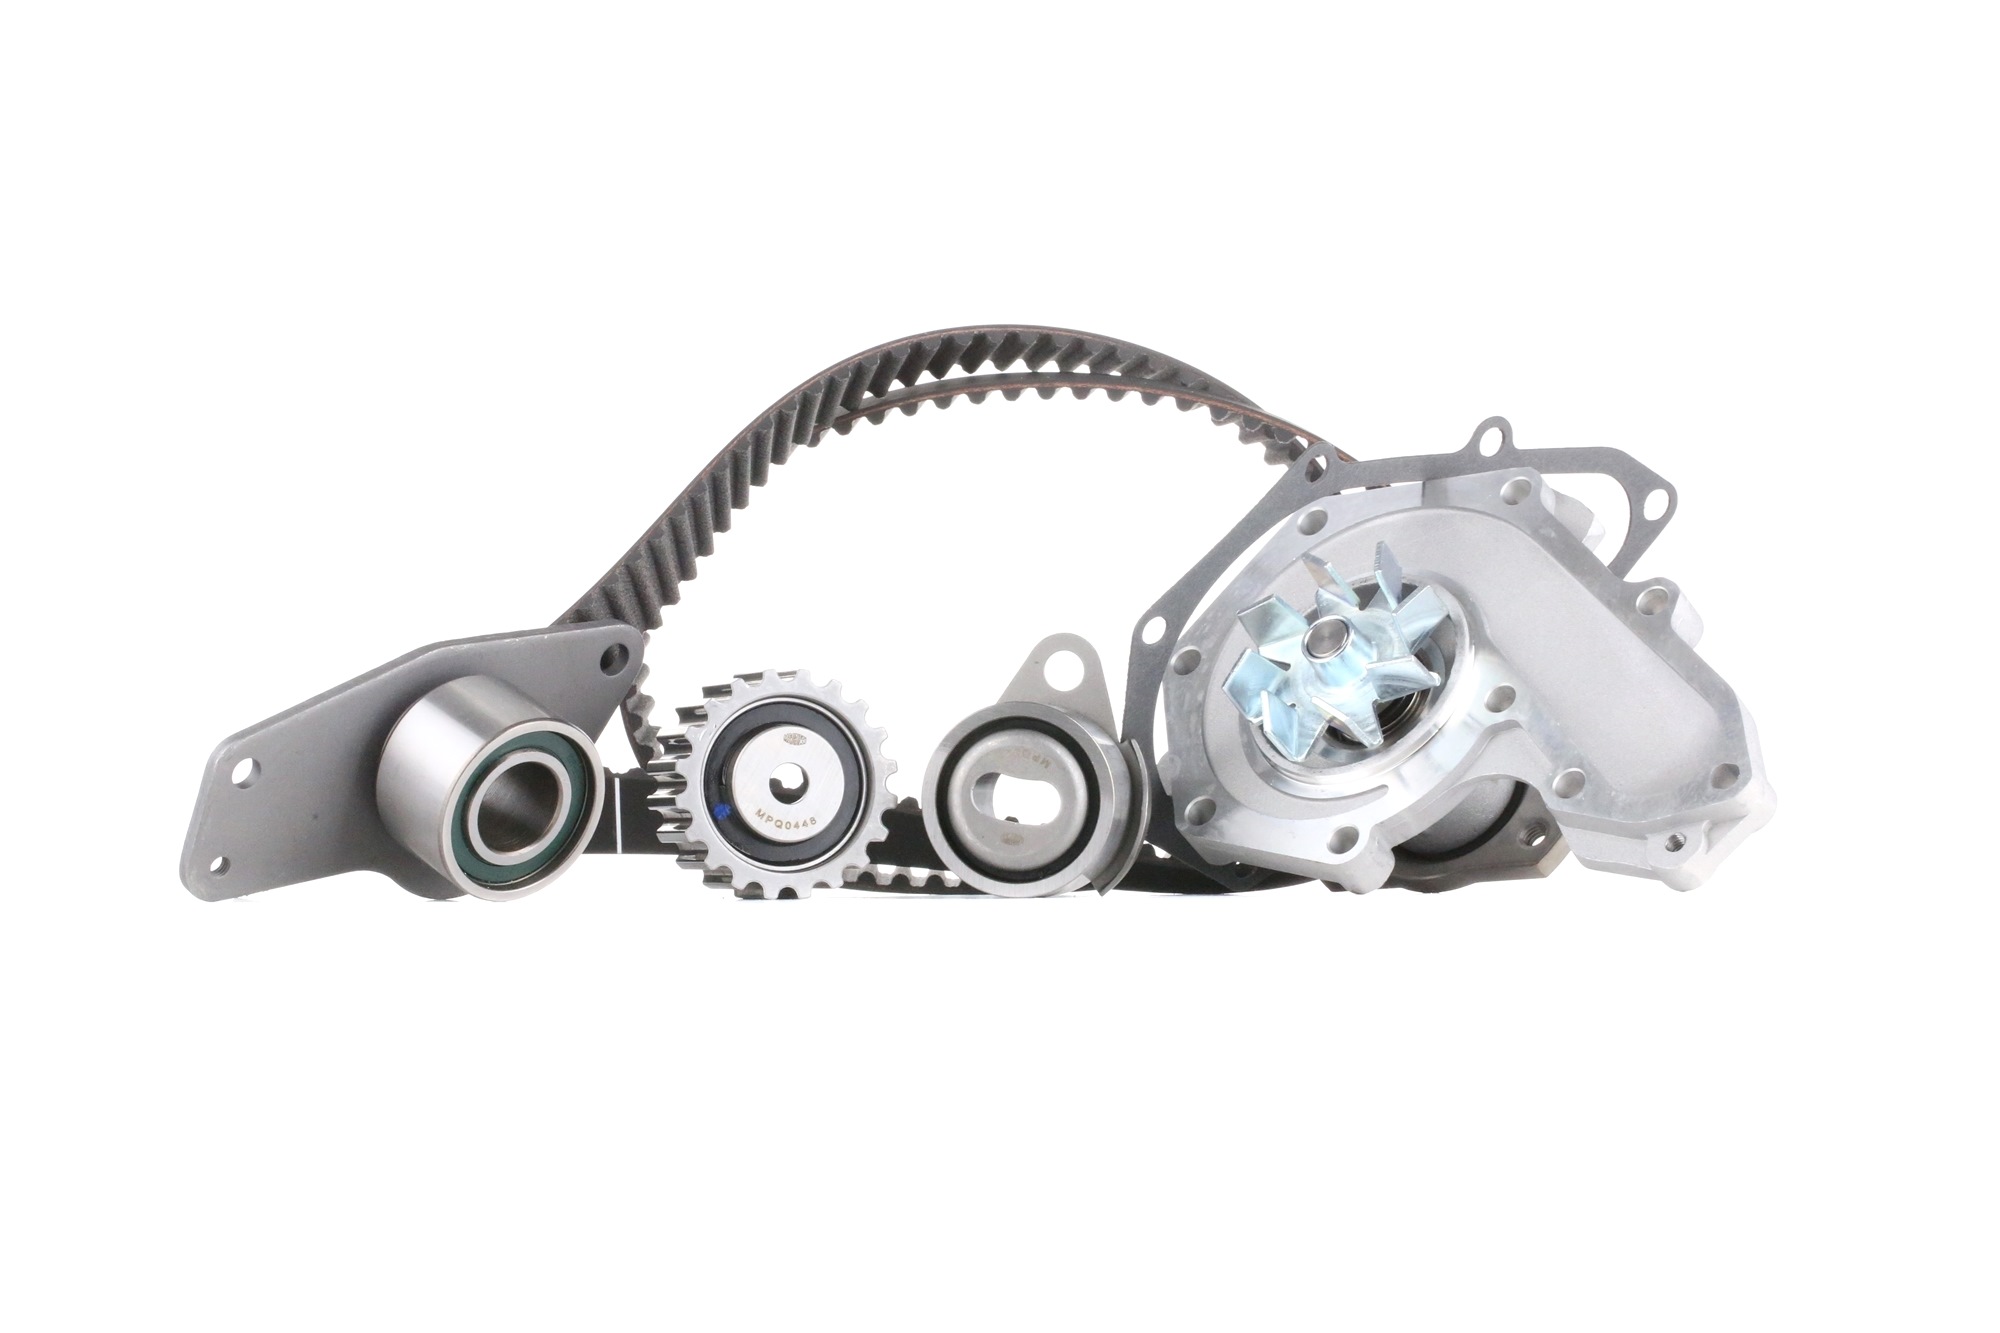 MAGNETI MARELLI 132011160044 Water pump and timing belt kit Number of Teeth: 151 L: 1438 mm, Width: 25,4 mm